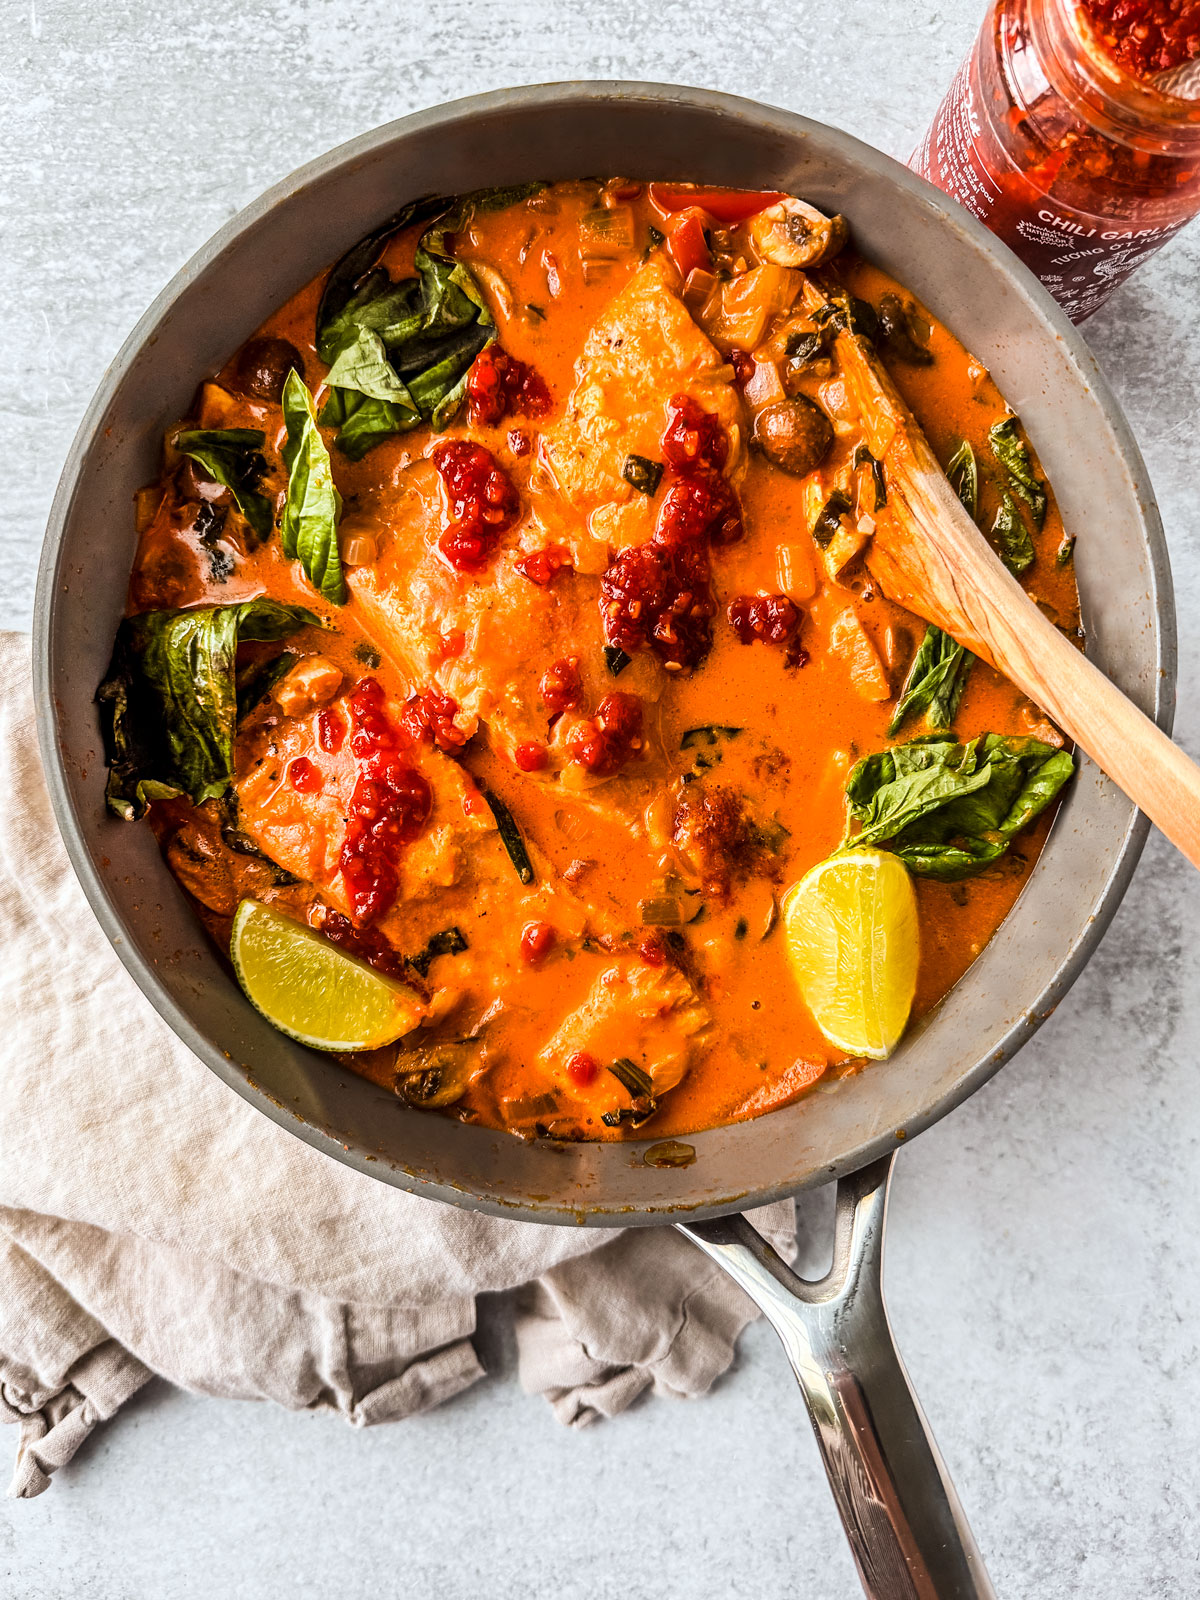 Sauté pan with curry salmon with coconut milk and lots of veggies.